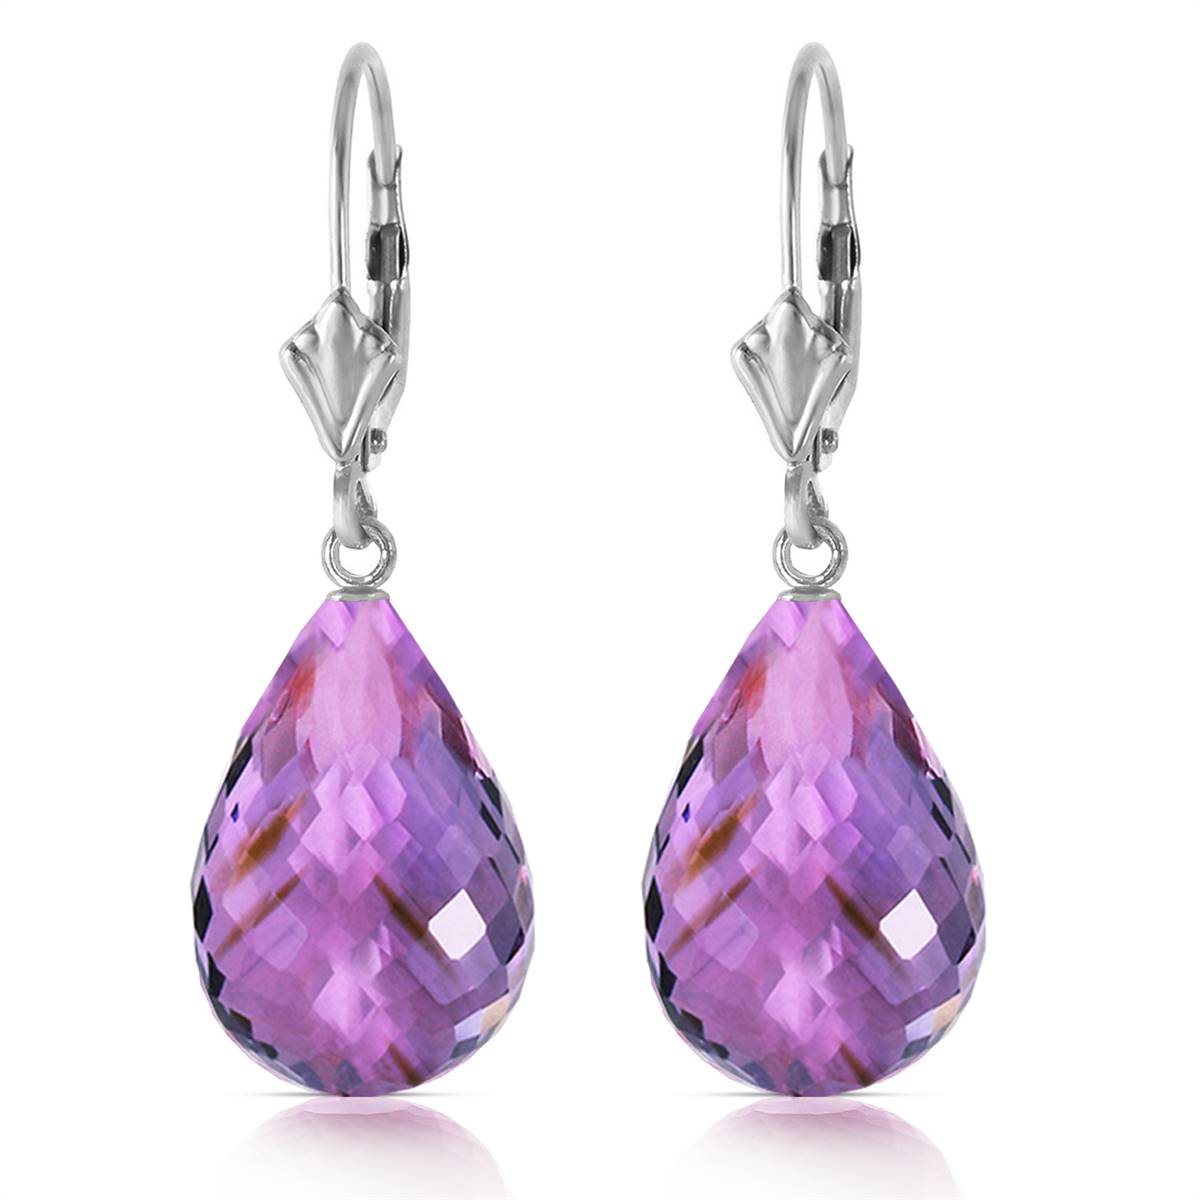 14 Carat 14K Solid White Gold Almost Touching Amethyst Earrings